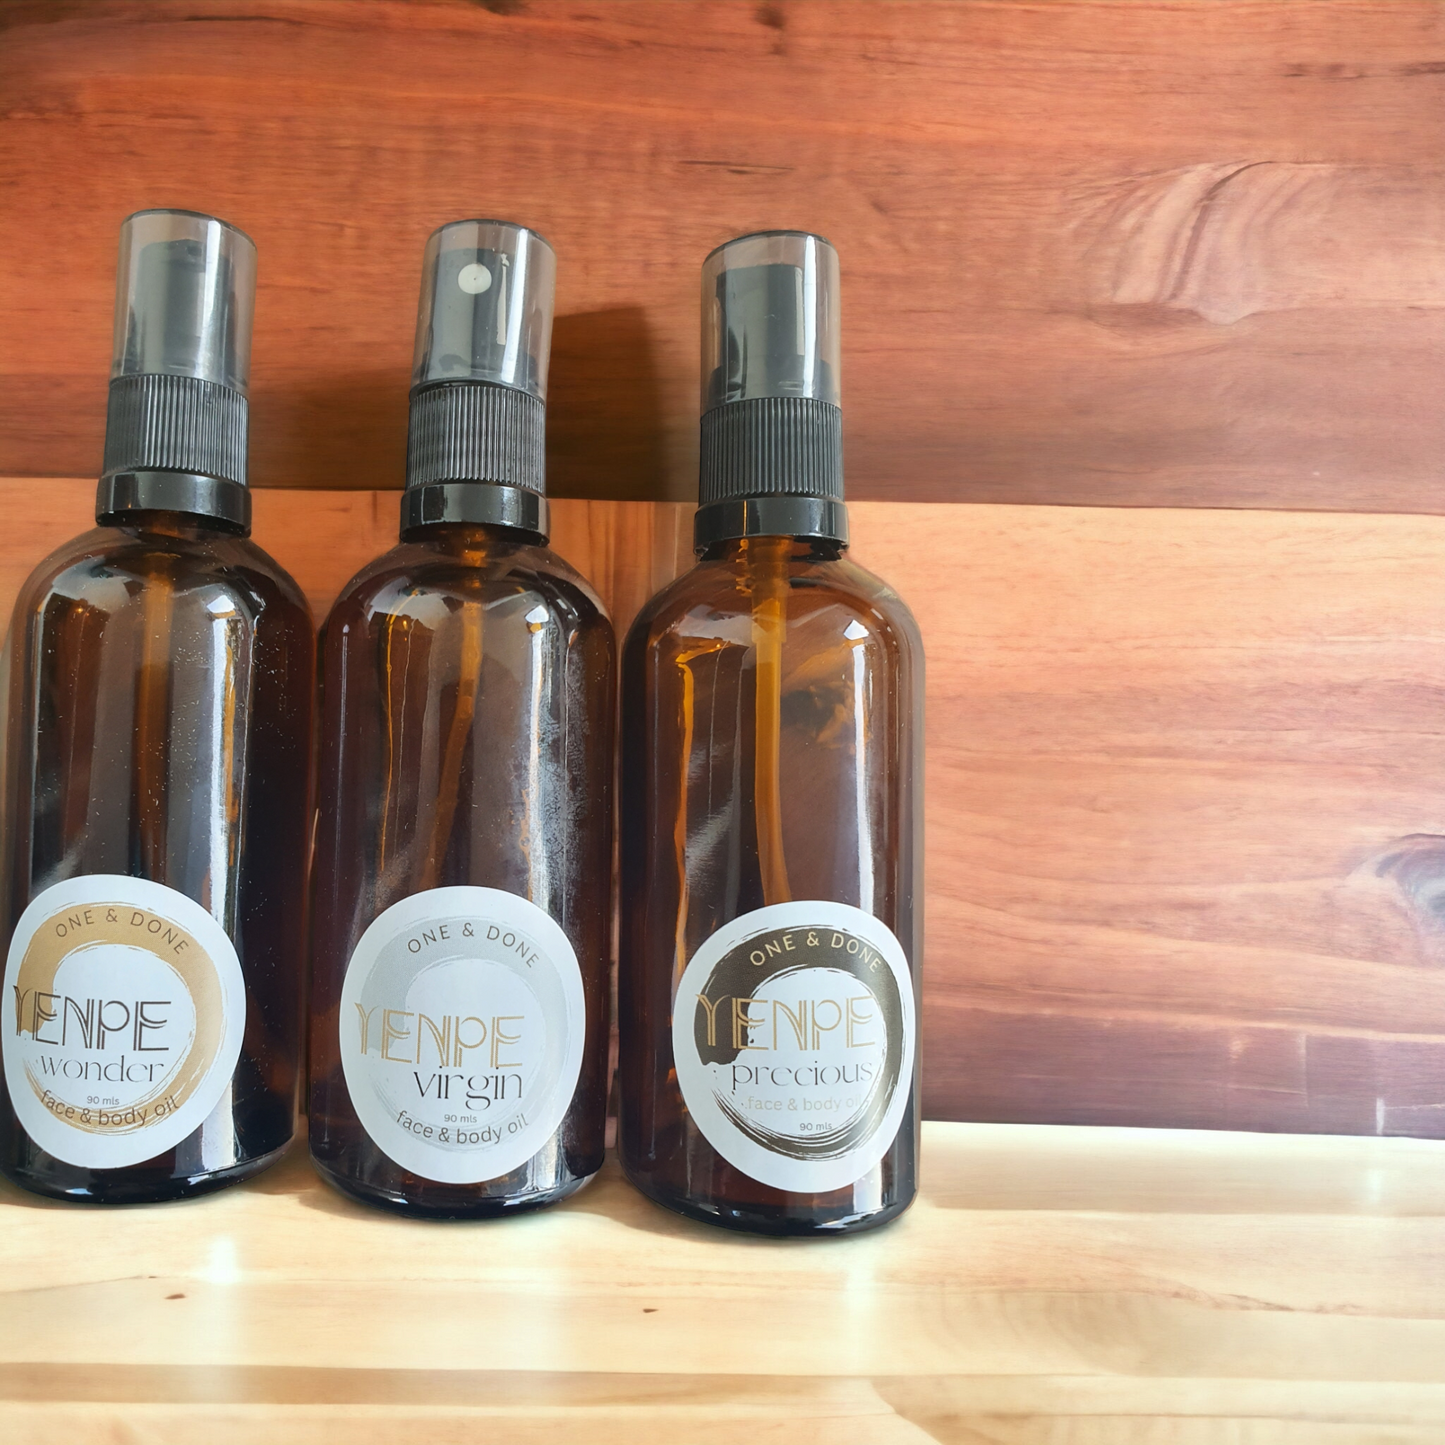 Face and /or Body Oils - Precious, Virgin and Wonder. Hand Made with Love. 